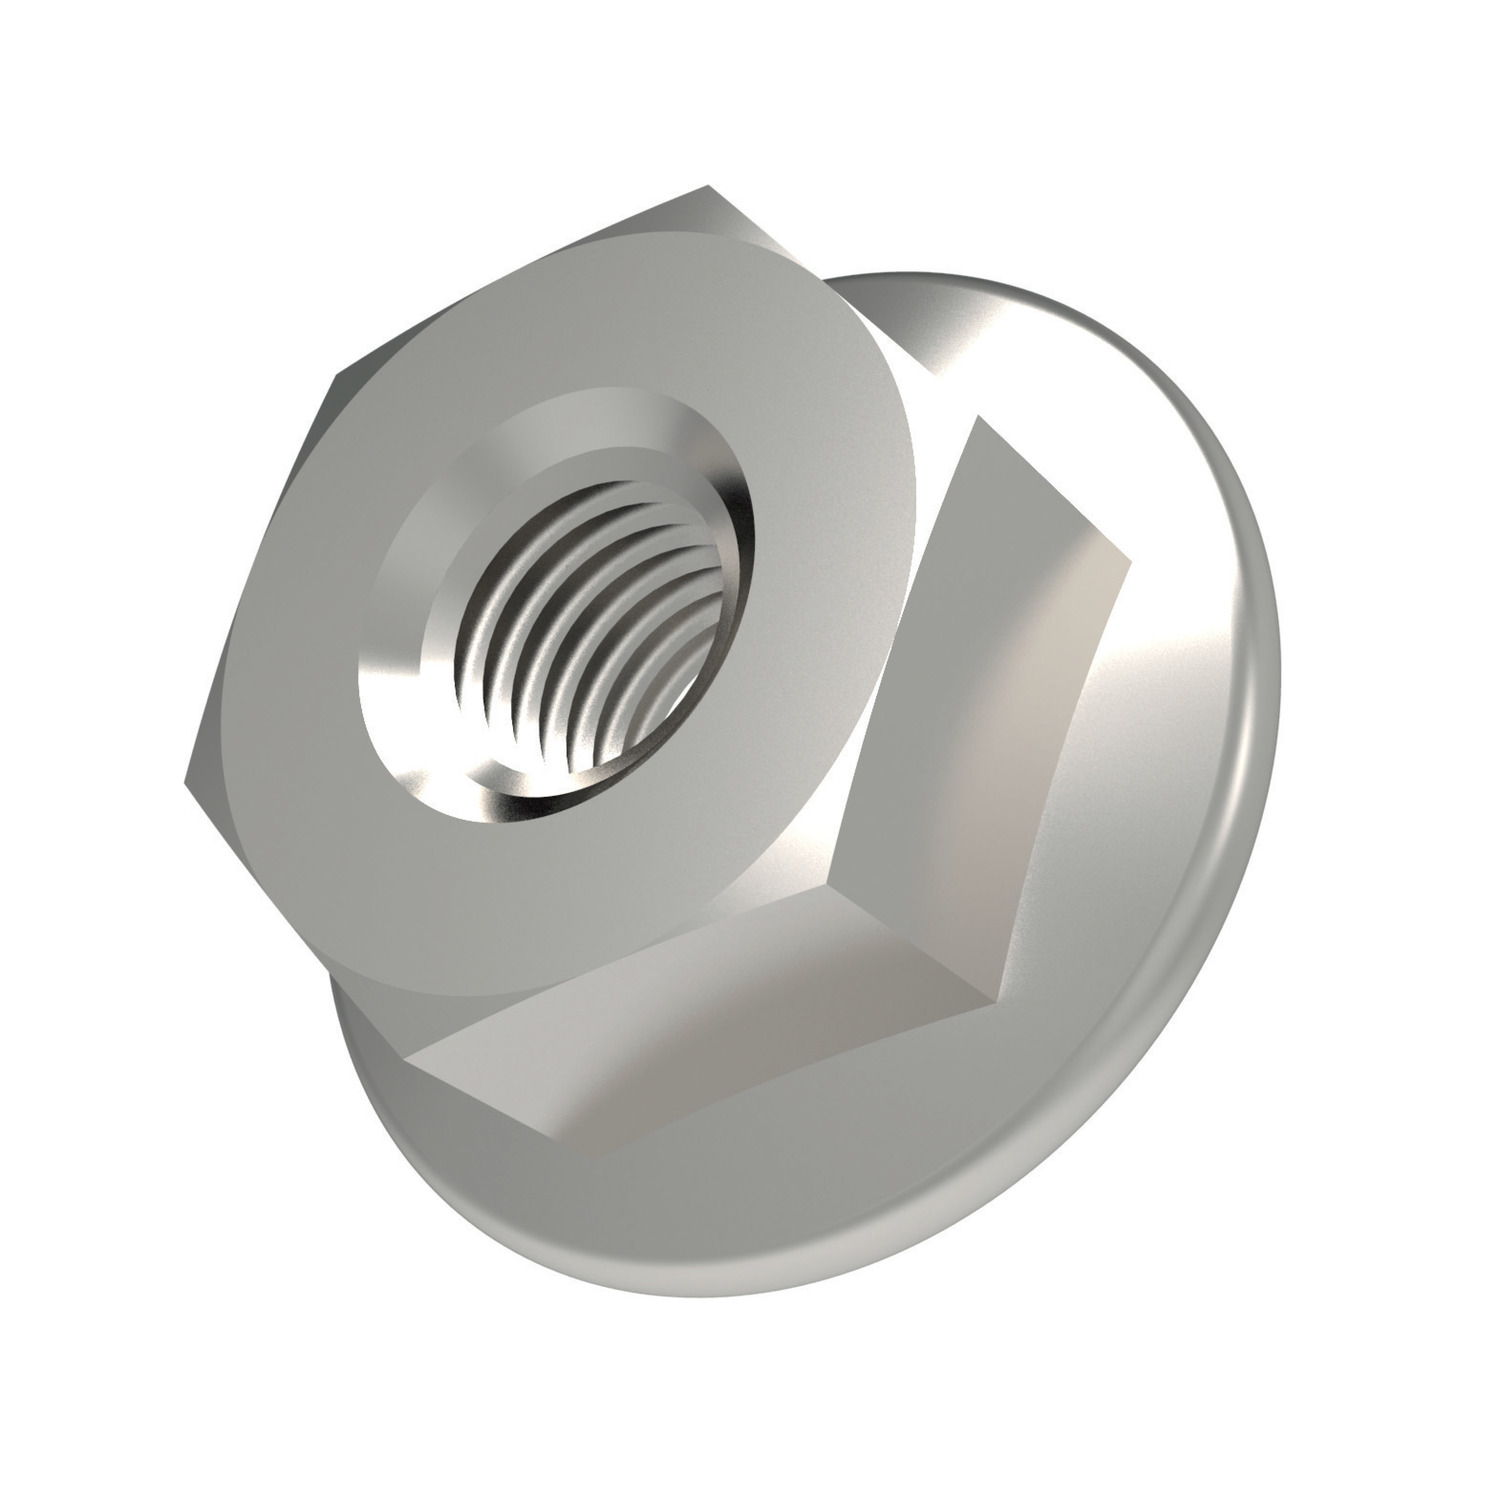 Flanged Nuts A2 stainless steel flanged nuts. Manufactured to DIN 6923. Sizes range from M4 to M24.